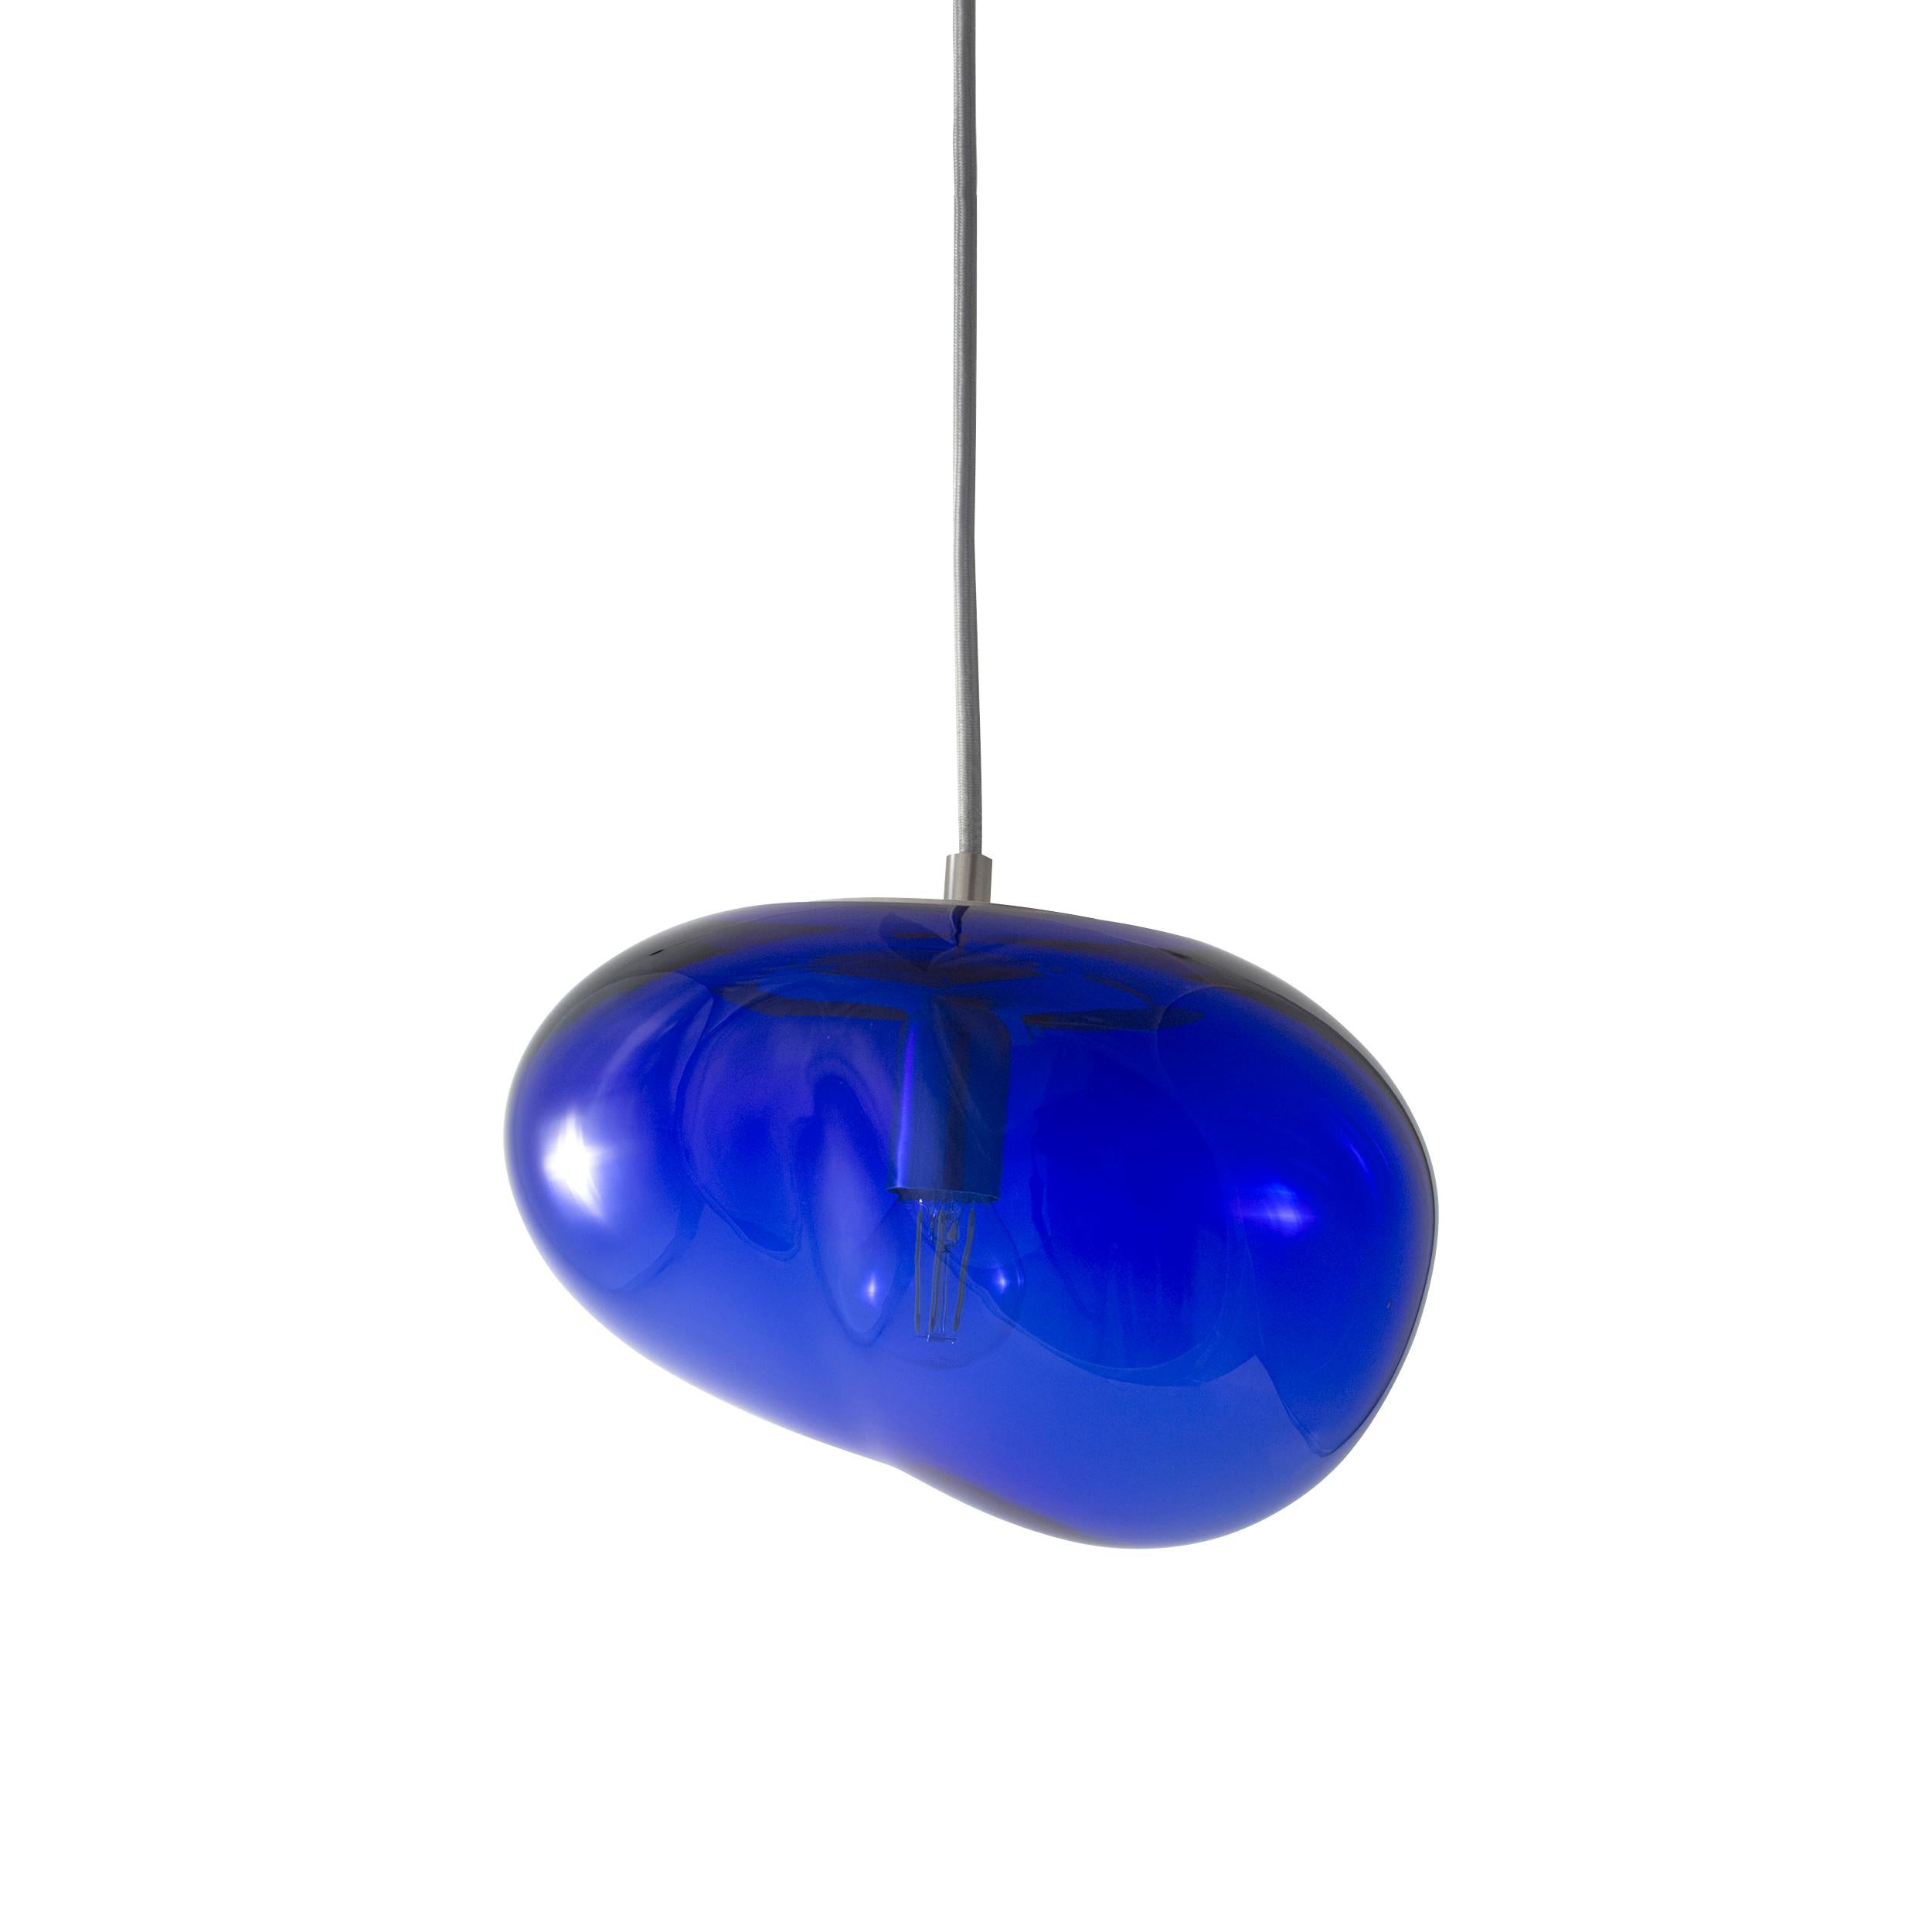 Planetoide Saiki blue pendant by Eloa.
No UL listed 
Material: glass, steel, silver, LED Bulb
Dimensions: D30 x W30 x H250 cm
Also available in different colours and dimensions.

All our lamps can be wired according to each country. If sold to the